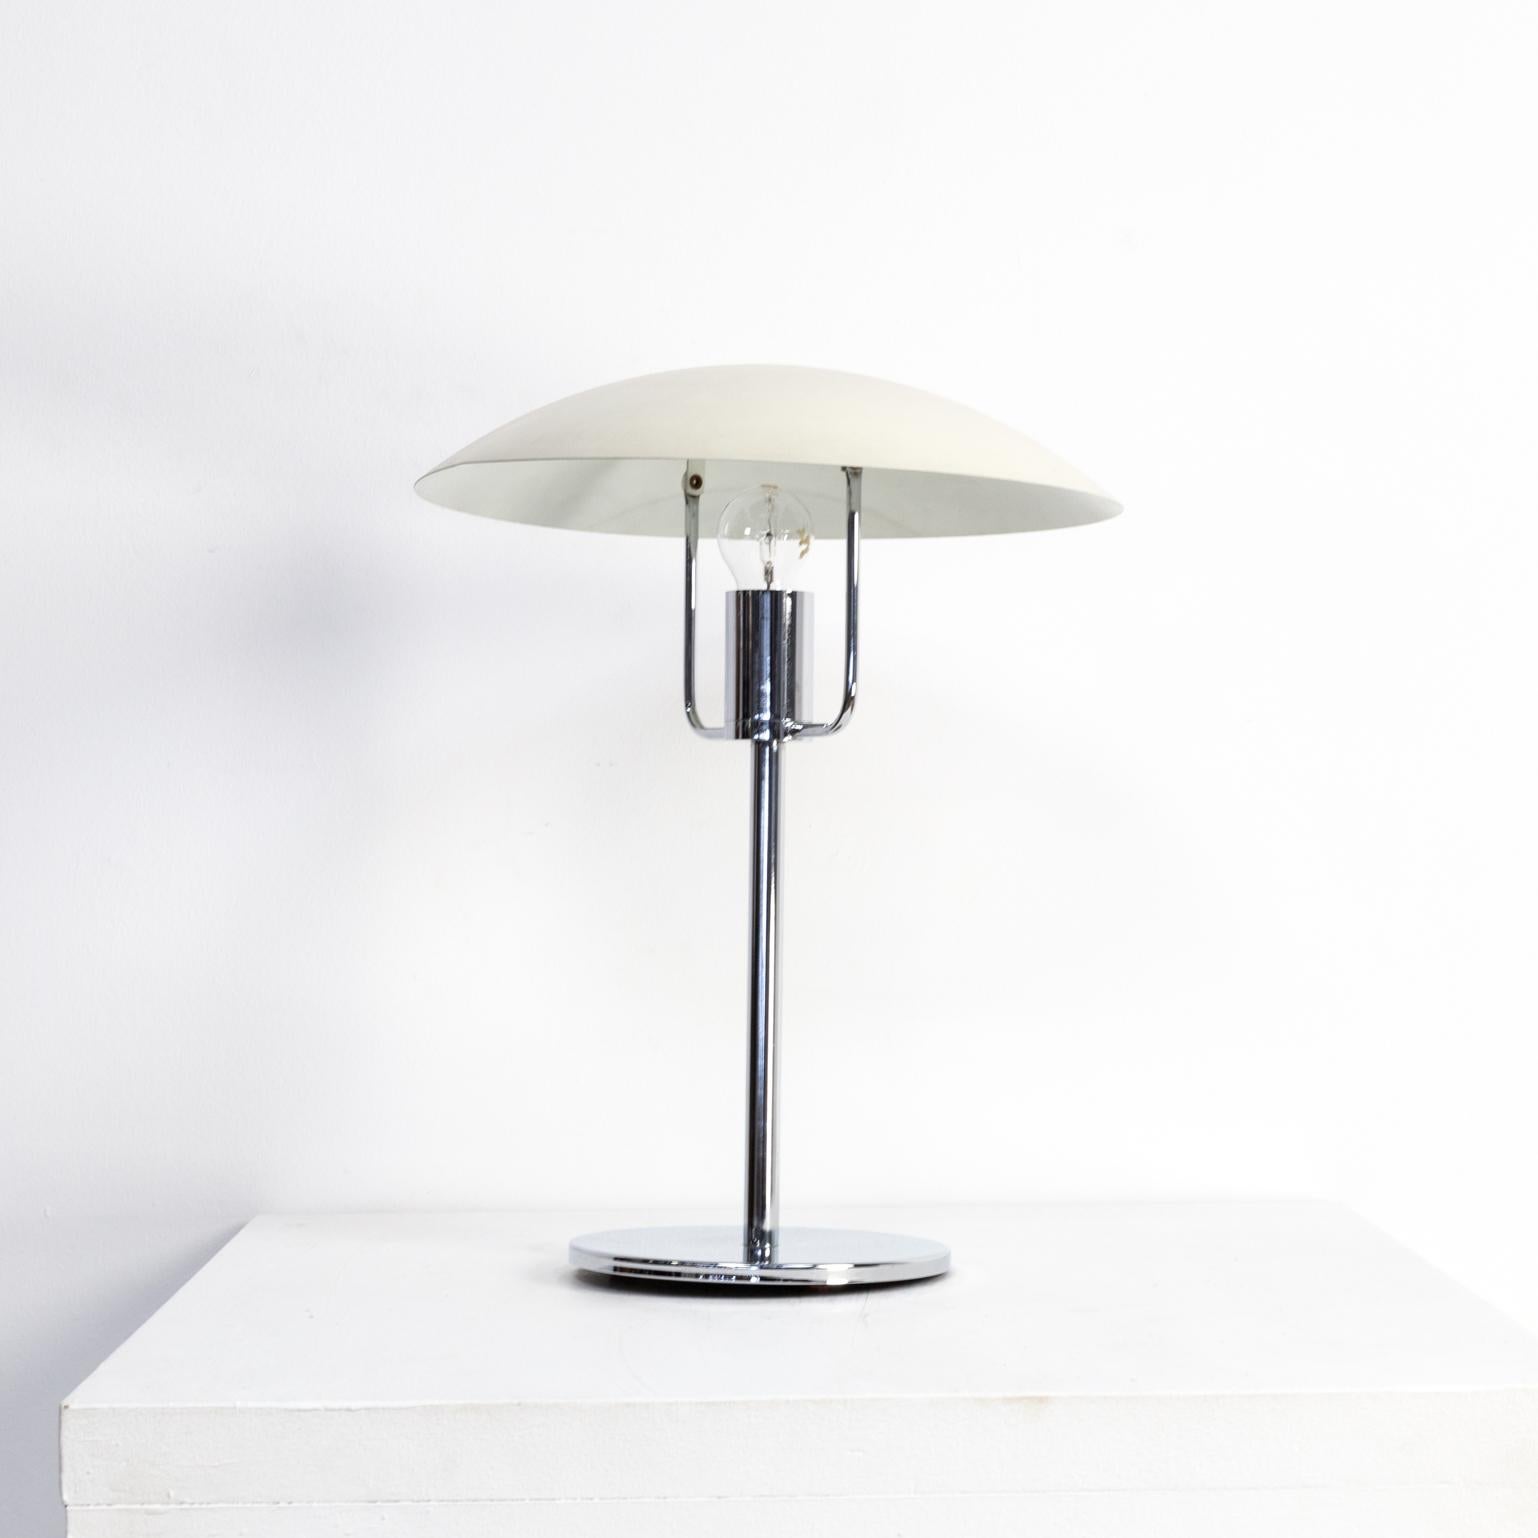 1970s Chrome and Metal Table Lamp for SCE (Ende des 20. Jahrhunderts) im Angebot